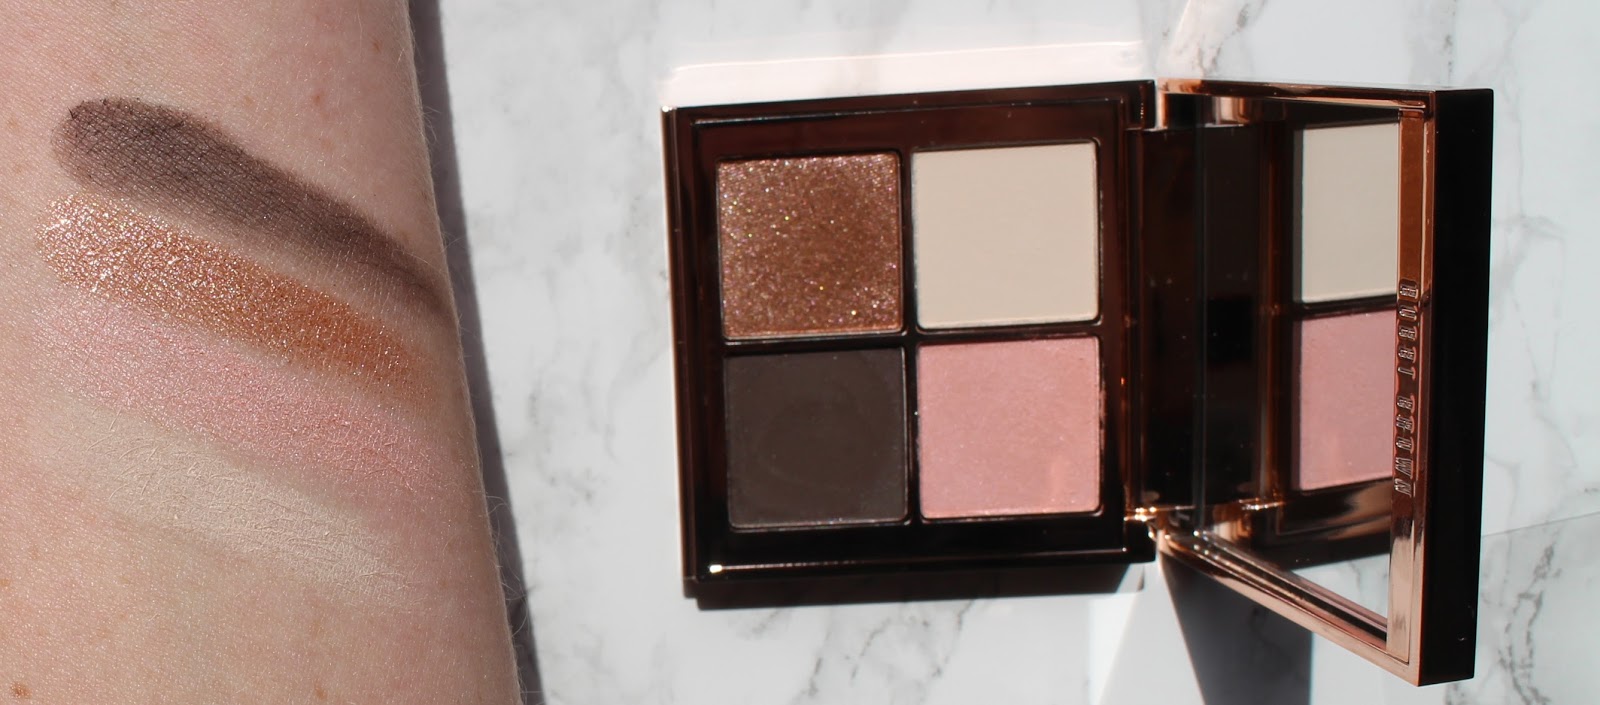 Bobbi-Brown-Beach-Nudes-SunkissedPink-review-swatches